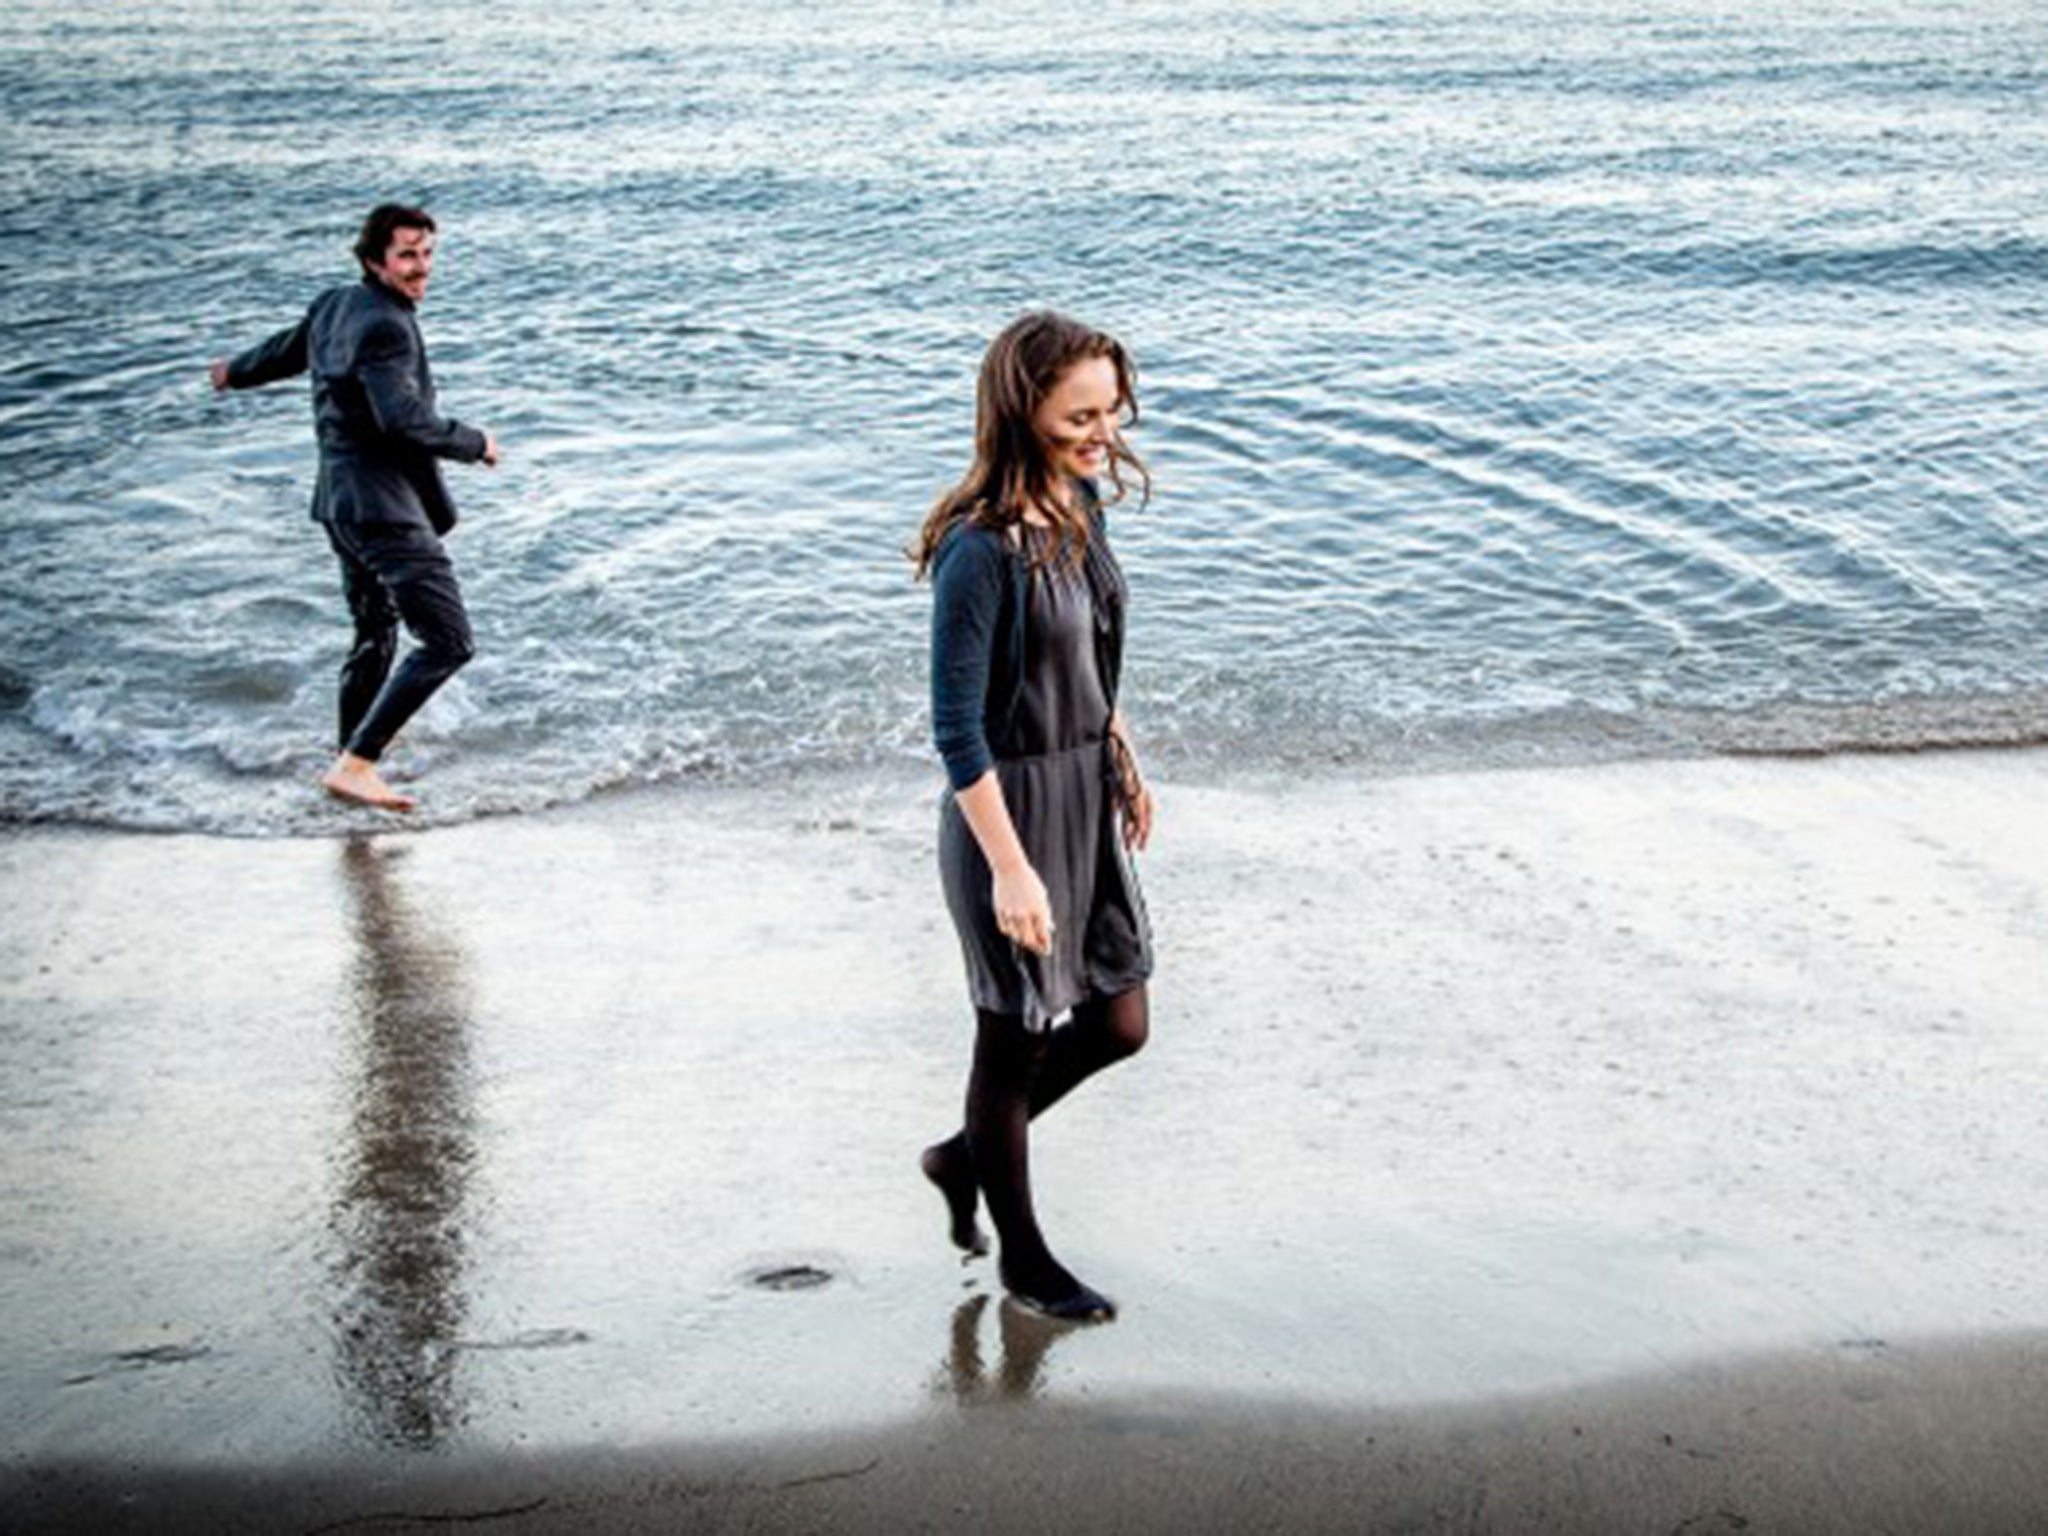 Christian Bale and Natalie Portman in ‘Knight of Cups’